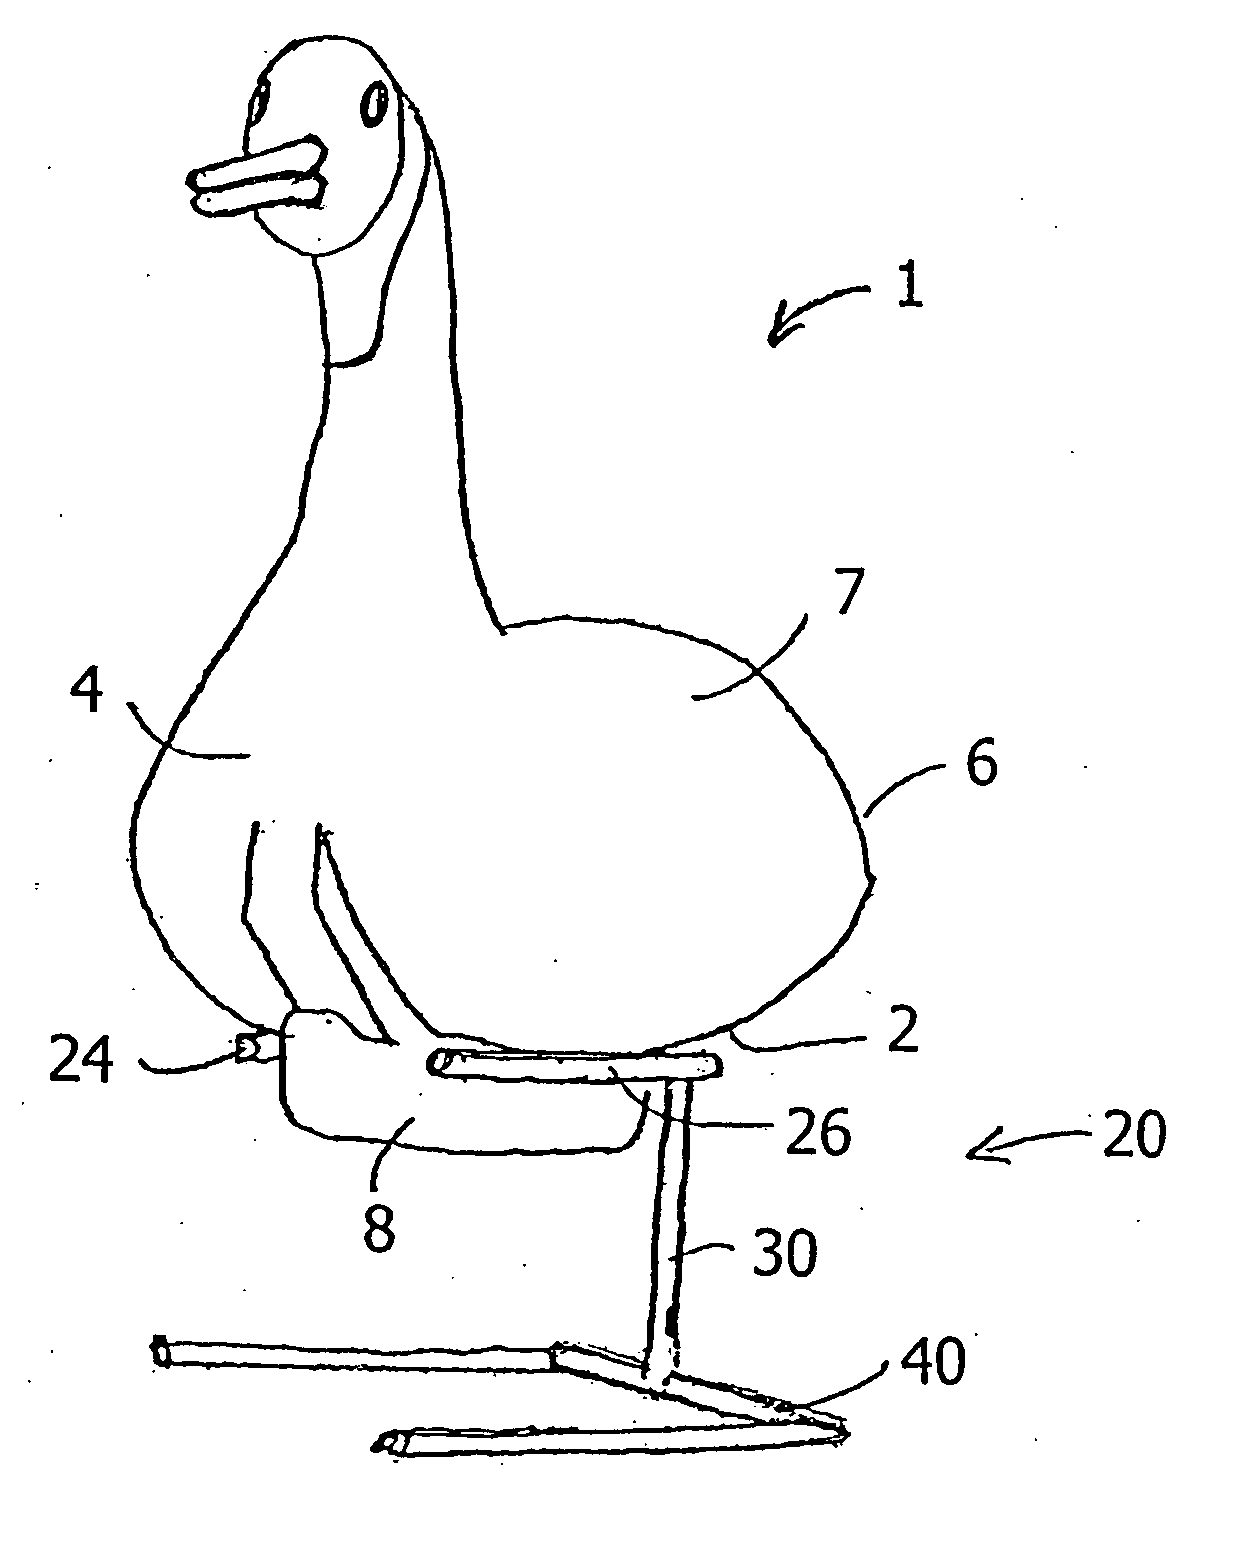 Adapter stand for use with a buoyant waterfowl decoy, kit including the adapter stand, and method of using same